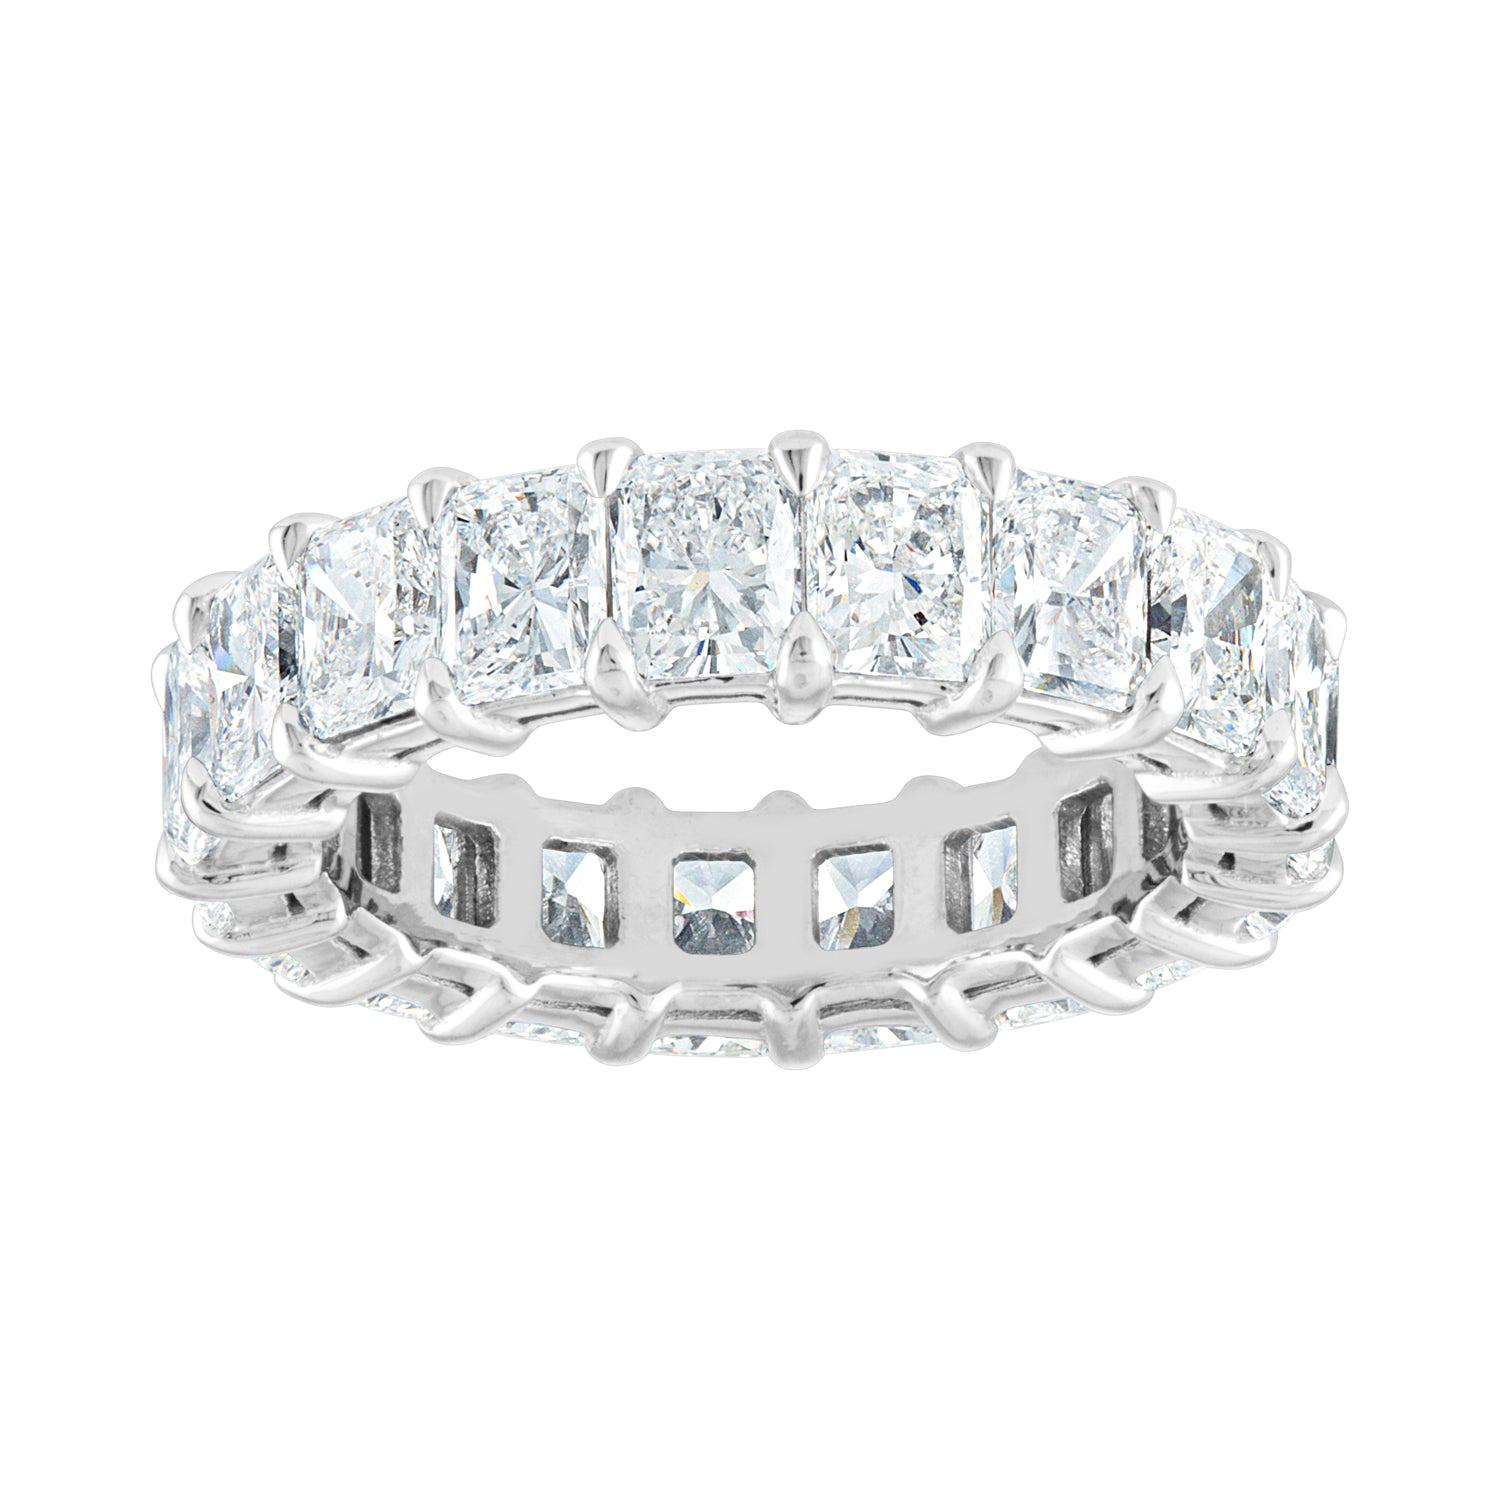 5.91 Carat Radiant Cut Diamond Gold Eternity Band Ring For Sale